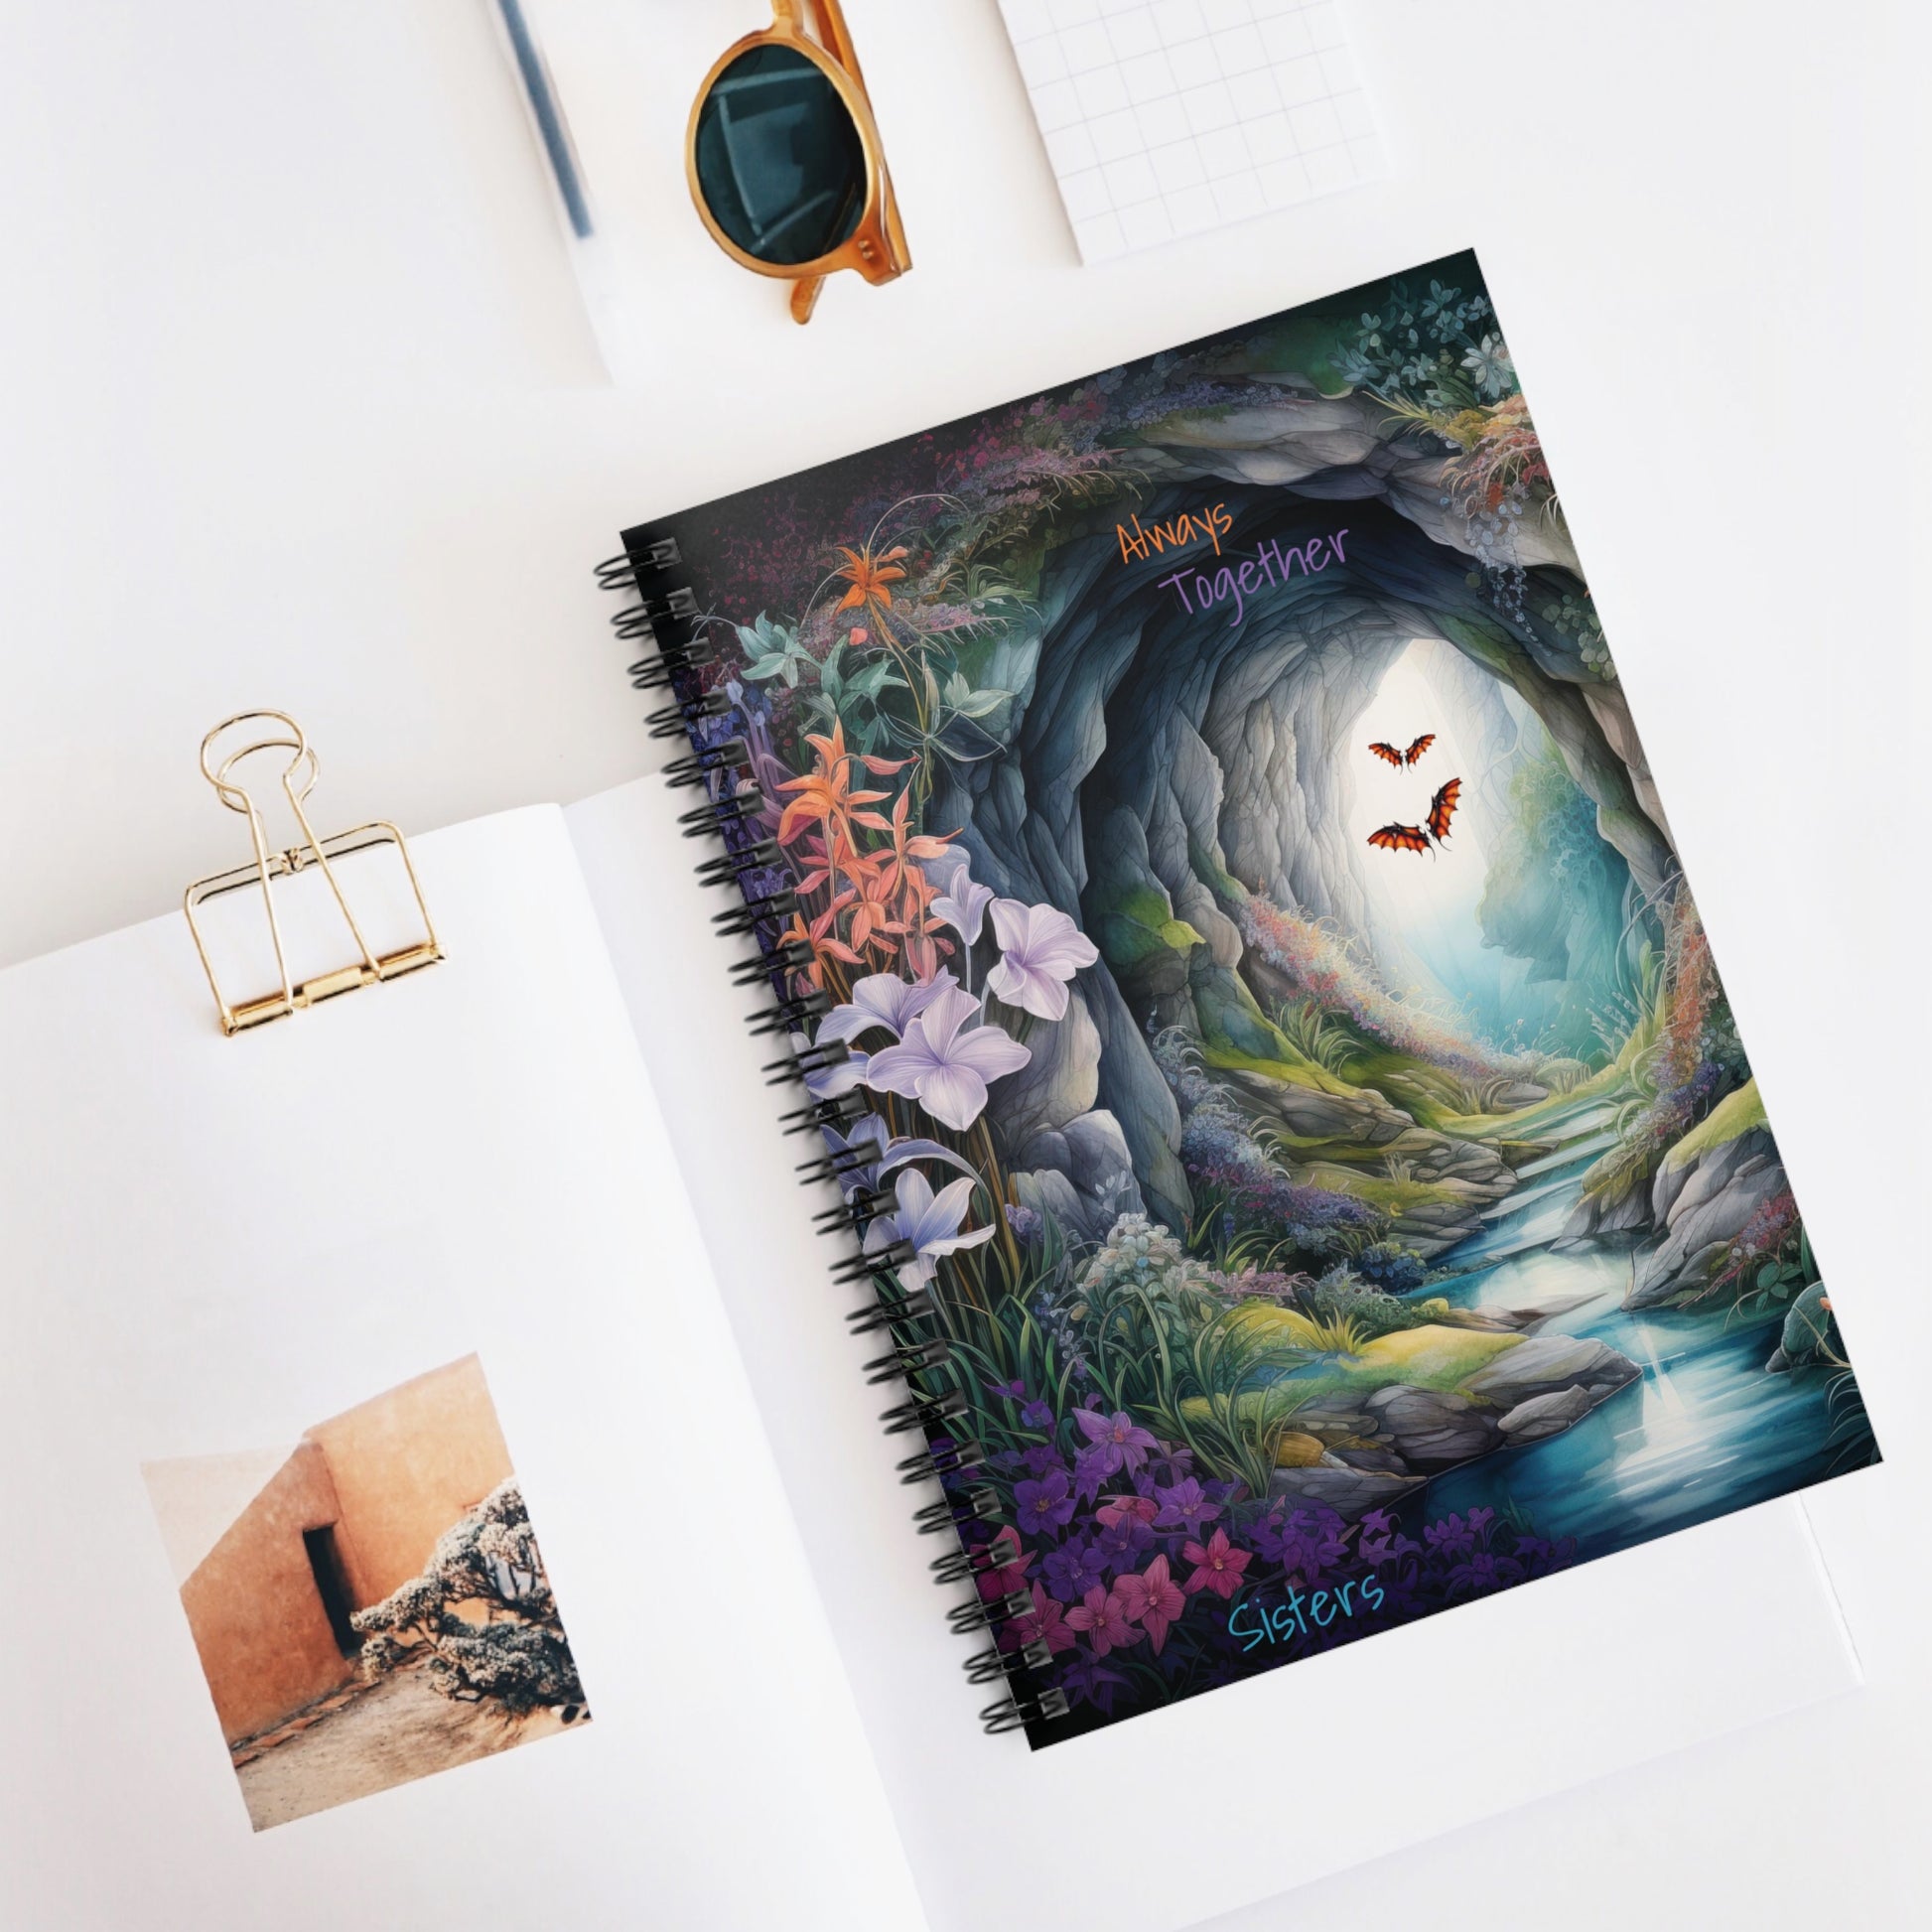 Always Together Sisters is the text on a front cover design on a spiral notebook - a blue cave beacons to you with a stream leading in flowers surround the cave entrance the cave leads into another realm?